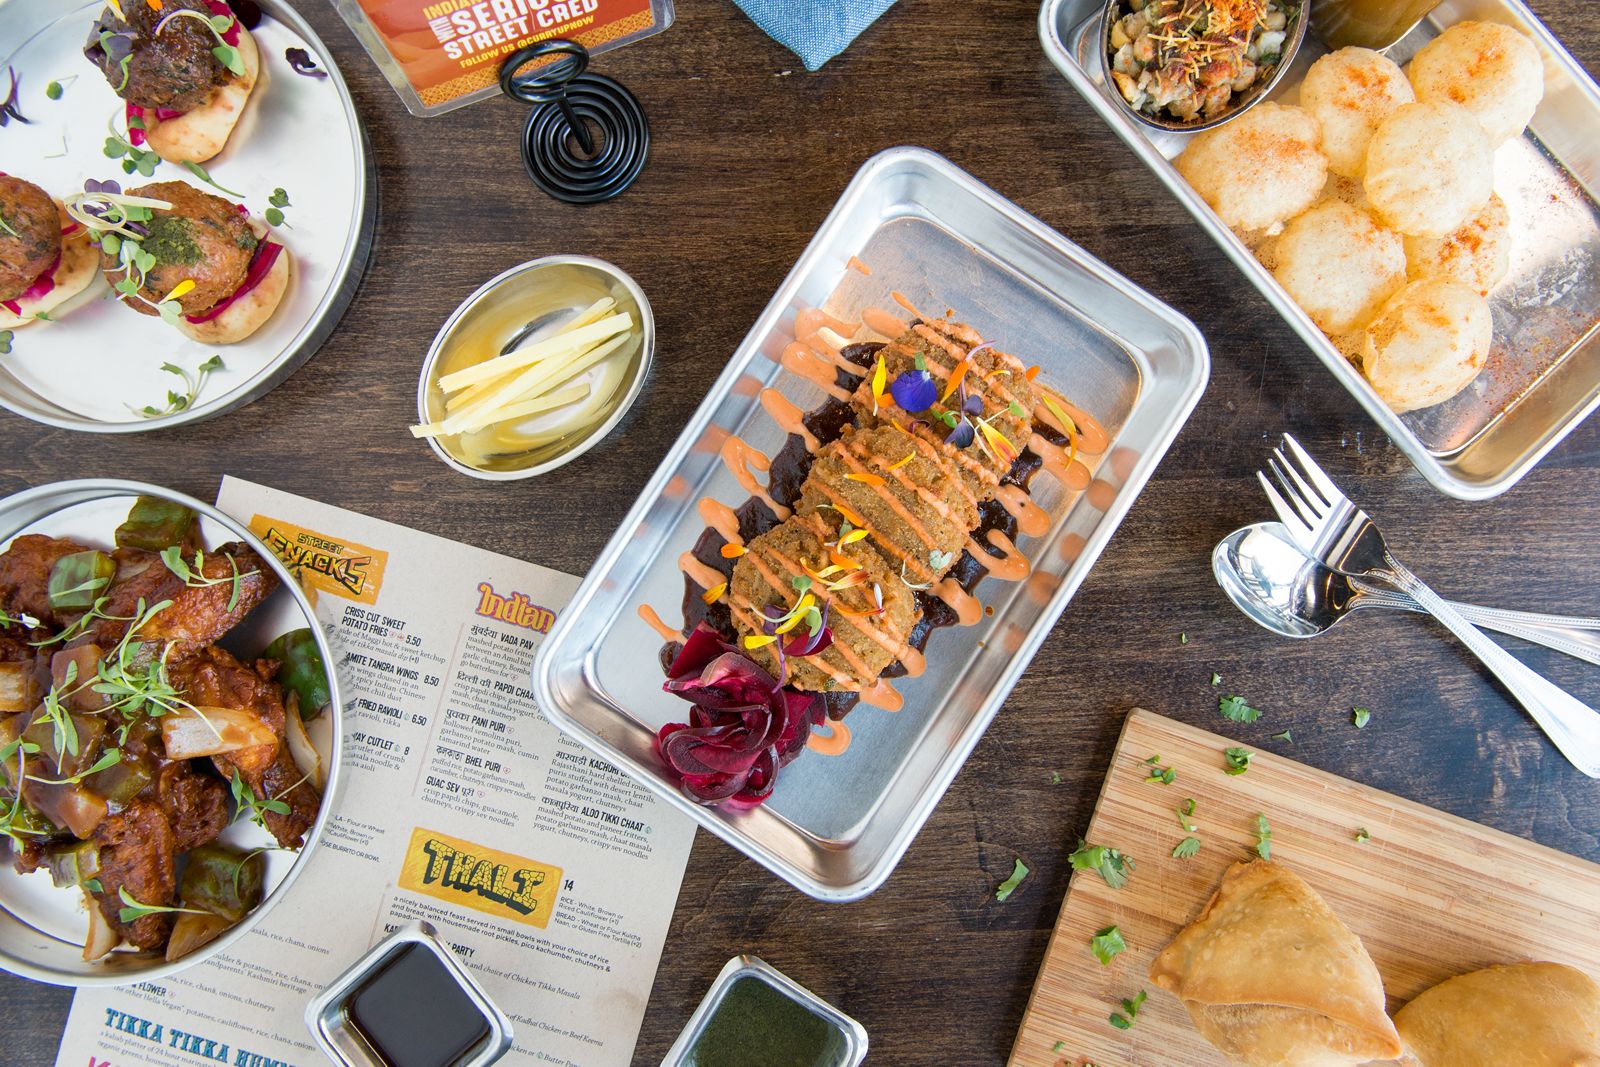 Curry Up Now, the nation's largest and fastest growing Indian fast casual chain, has secured its first restaurant location in Salt Lake City, Utah at The Shops at Fort Union. The restaurant is slated to open in late Fall of this year.